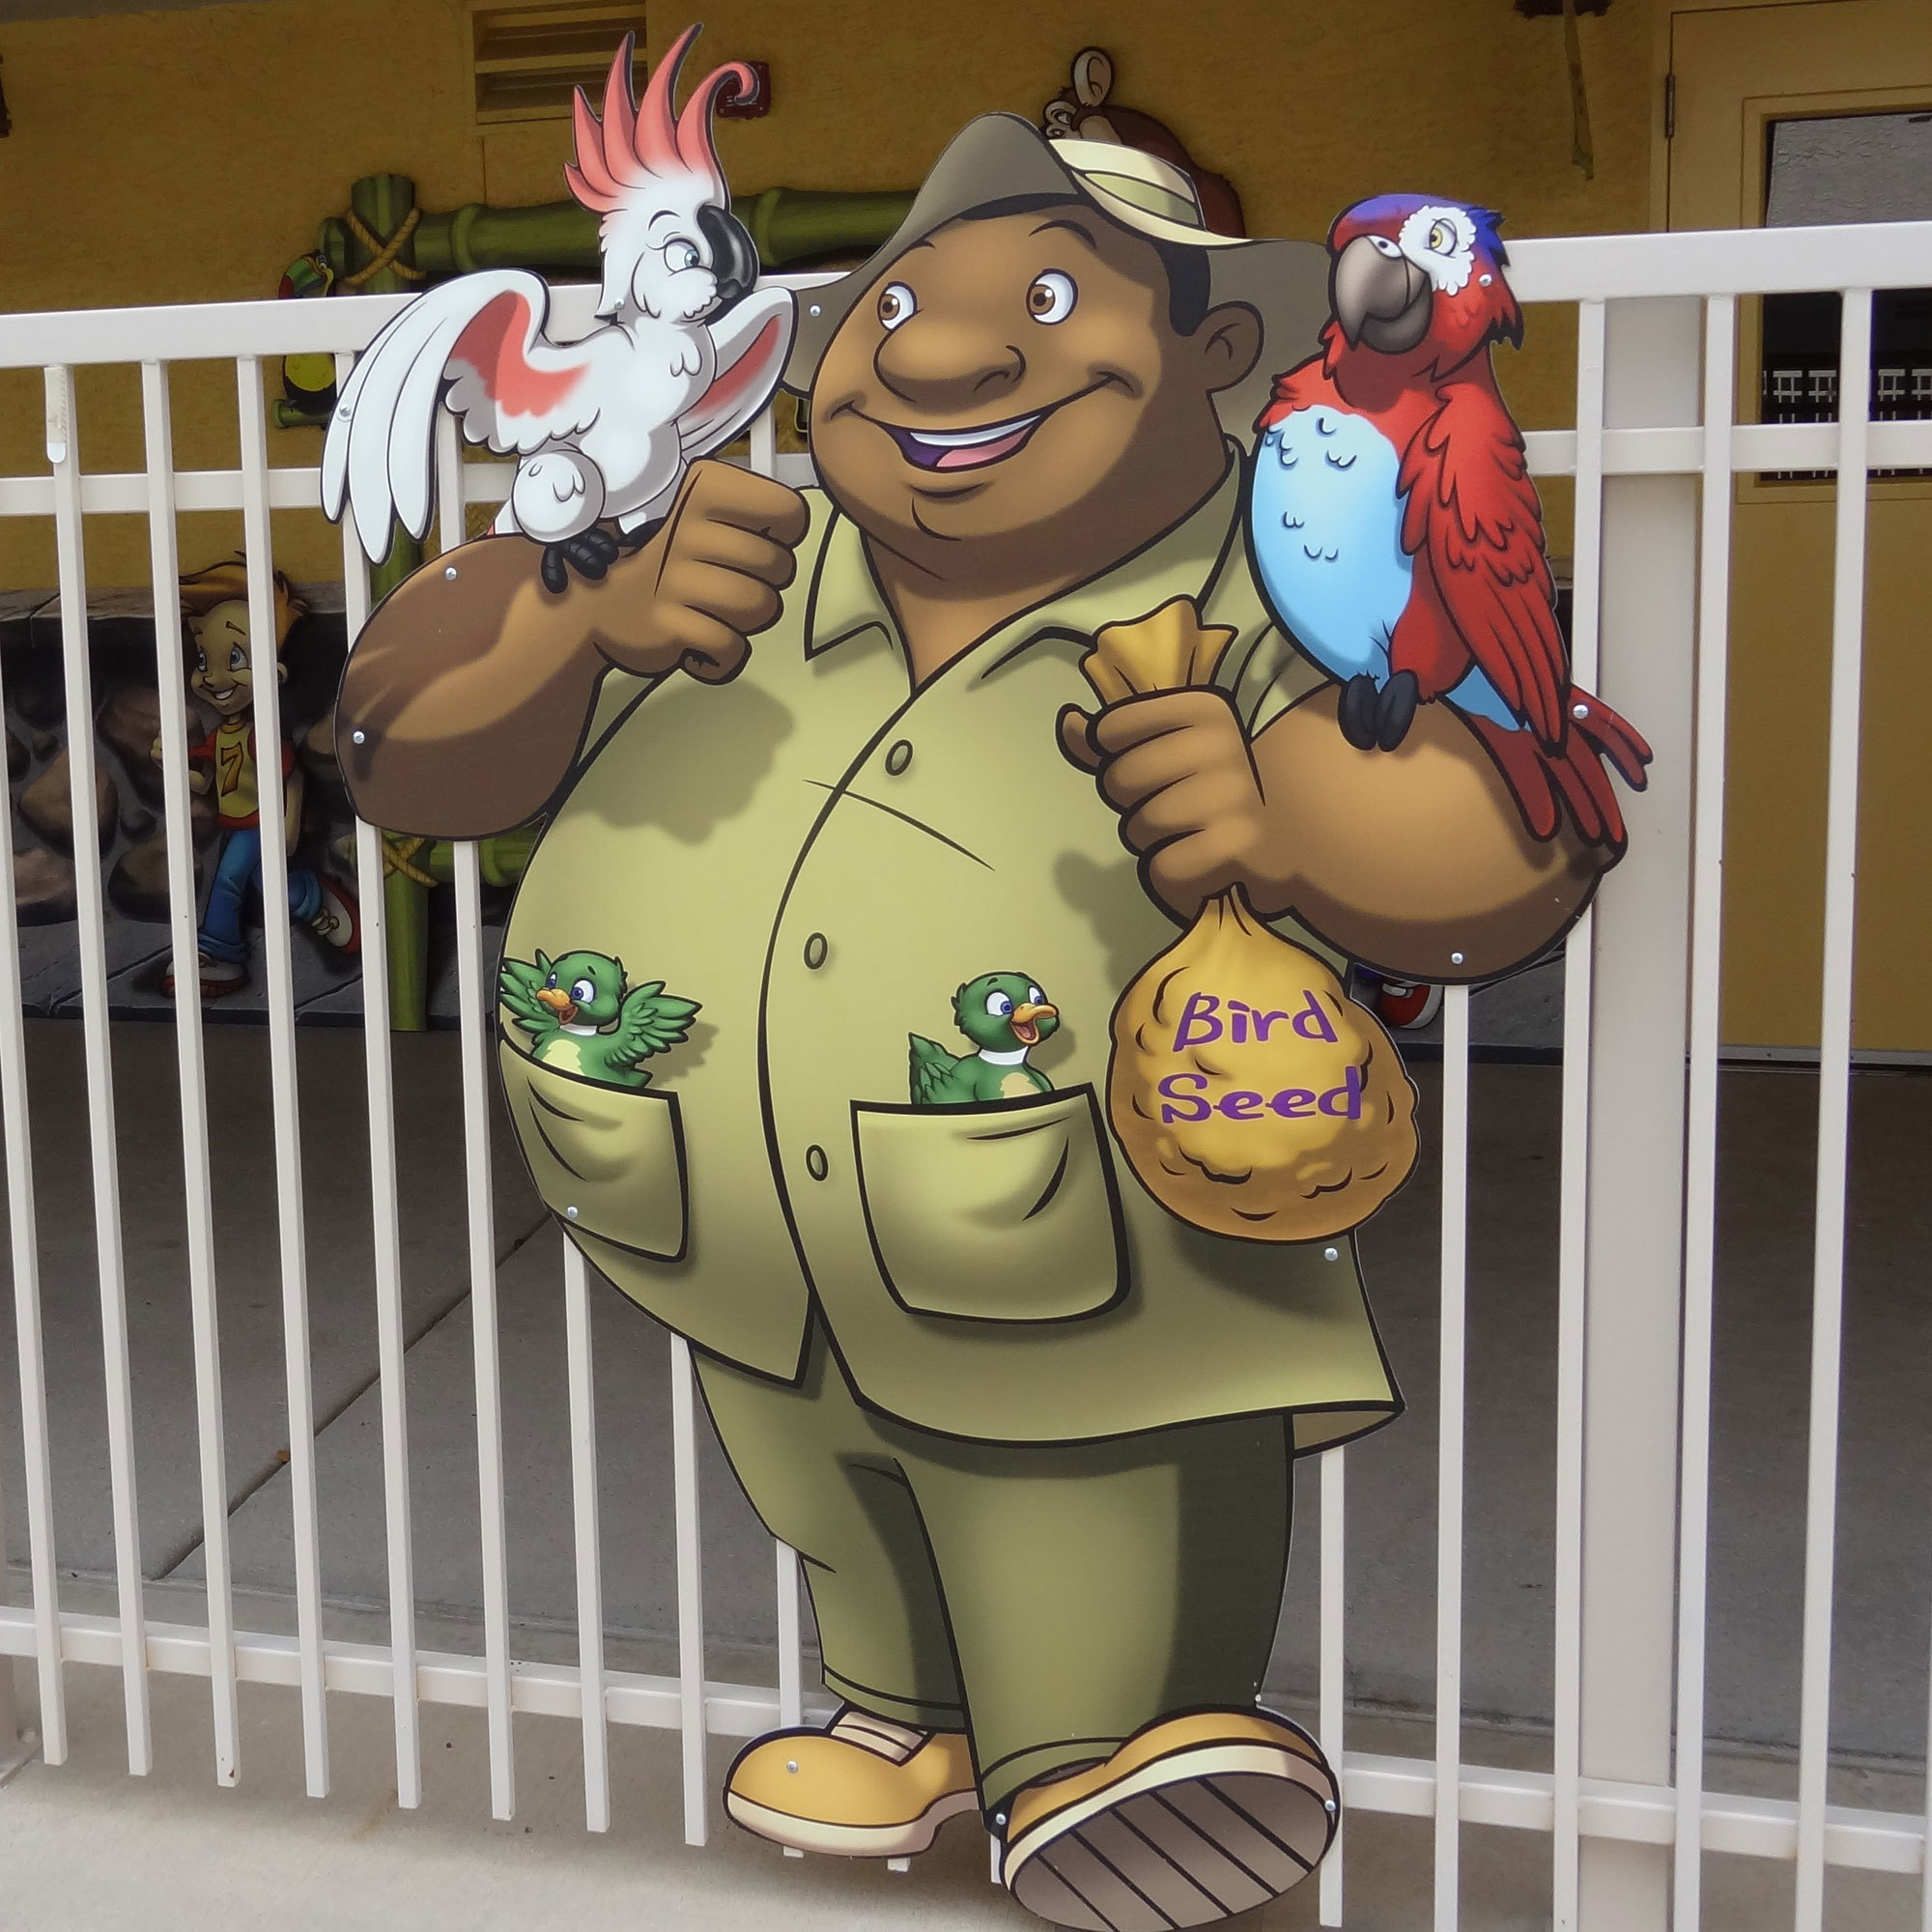 2D Zoo Character with birds and feed Cutout at Casas Church